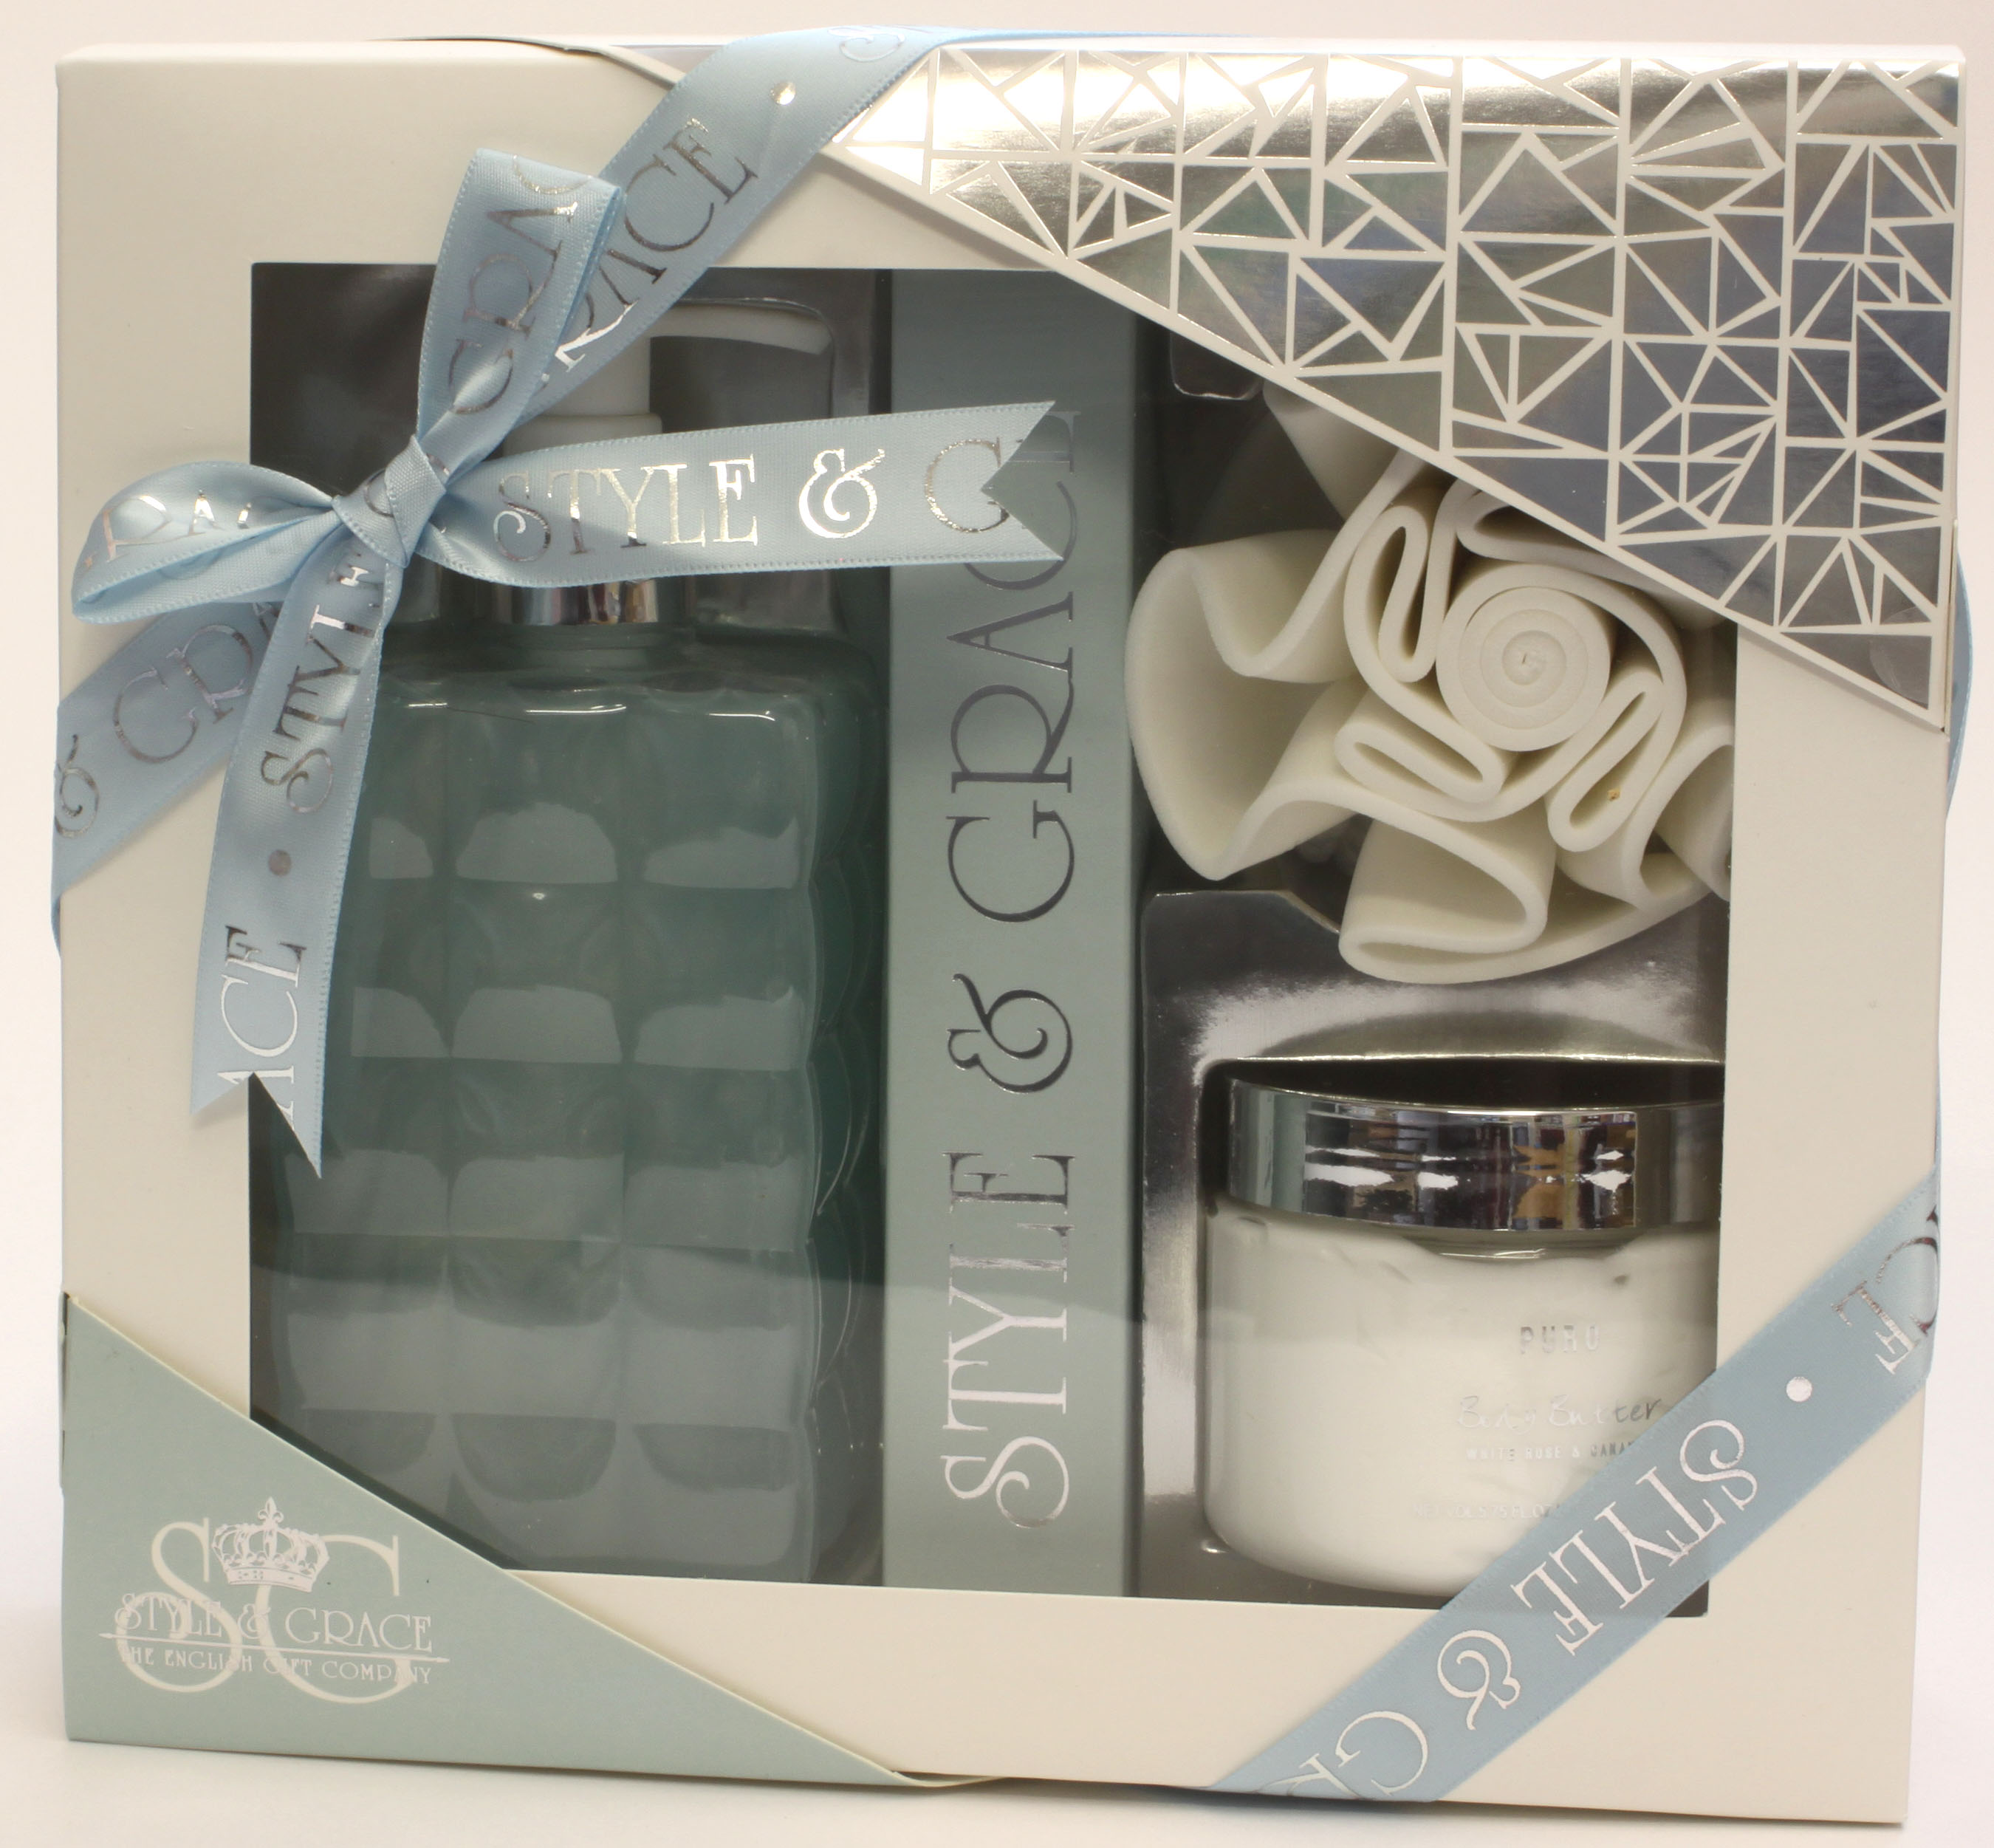 Style & Grace Puro Collection Gift Set